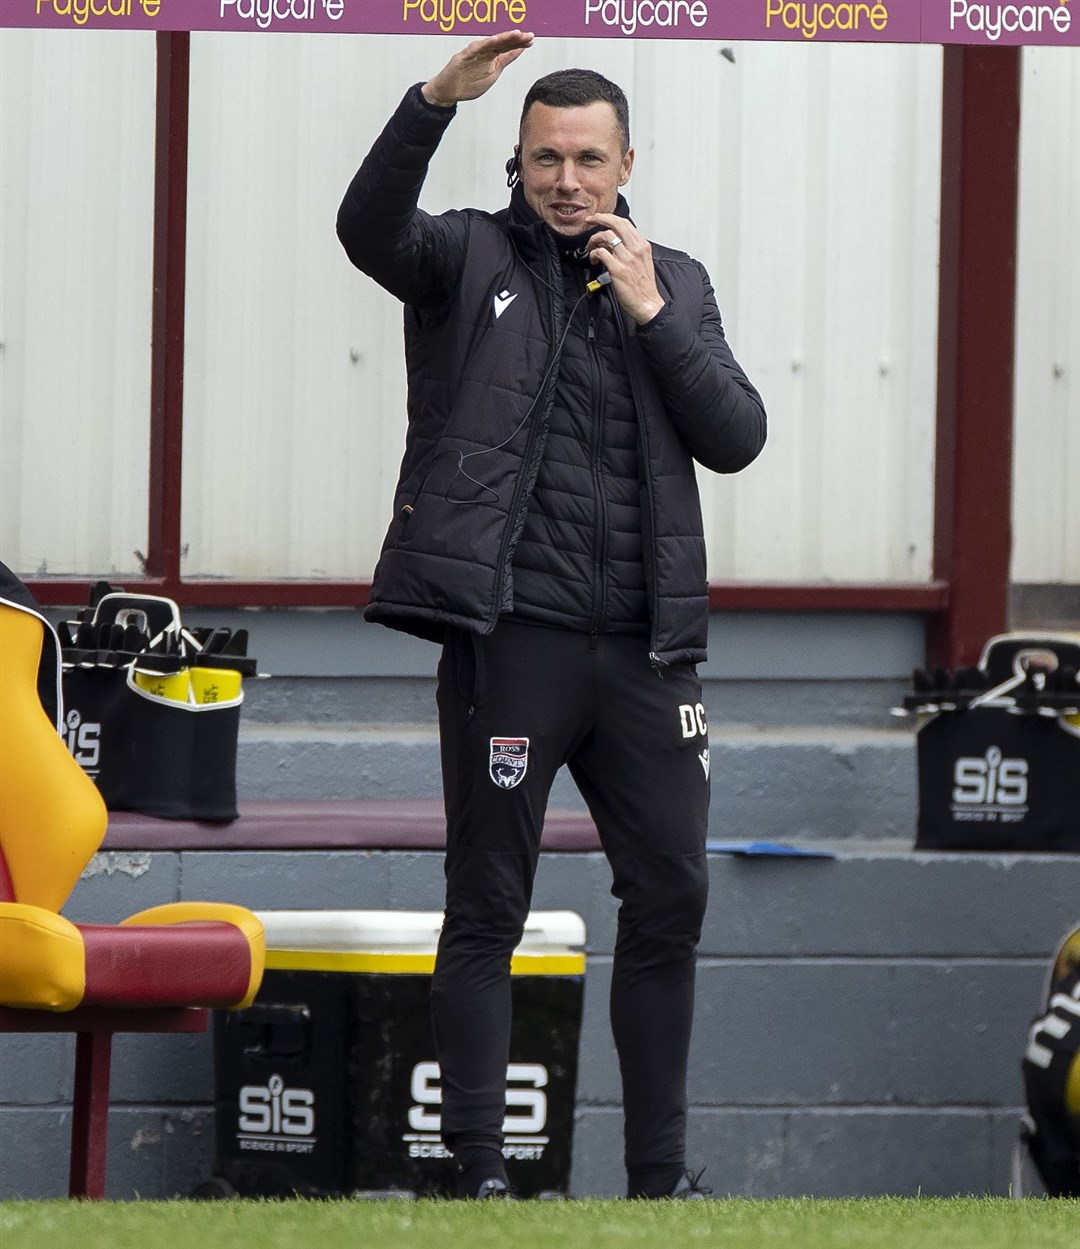 Picture - Ken Macpherson, Inverness. Motherwell(1) v Ross County(2). 16.05.21. Ross County coach Don Cowie.